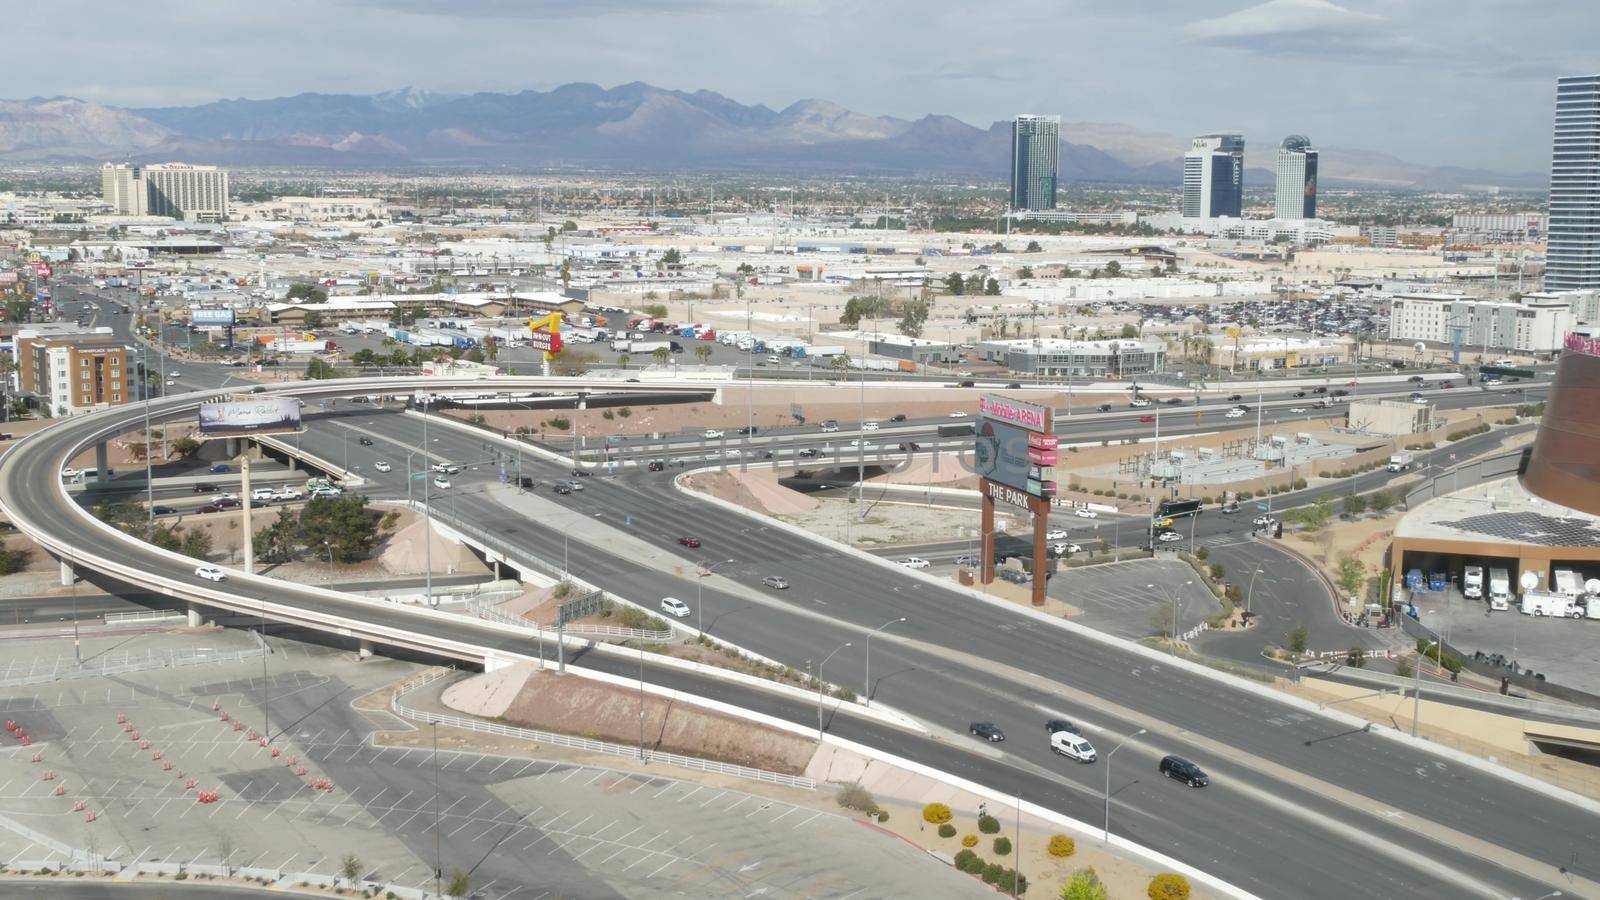 LAS VEGAS, NEVADA USA - 7 MAR 2020: Sin city in Mojave desert from above. Traffic highway in valley with arid climate. Aerial view of road in tourist metropolis. Gambling and betting area with casino.